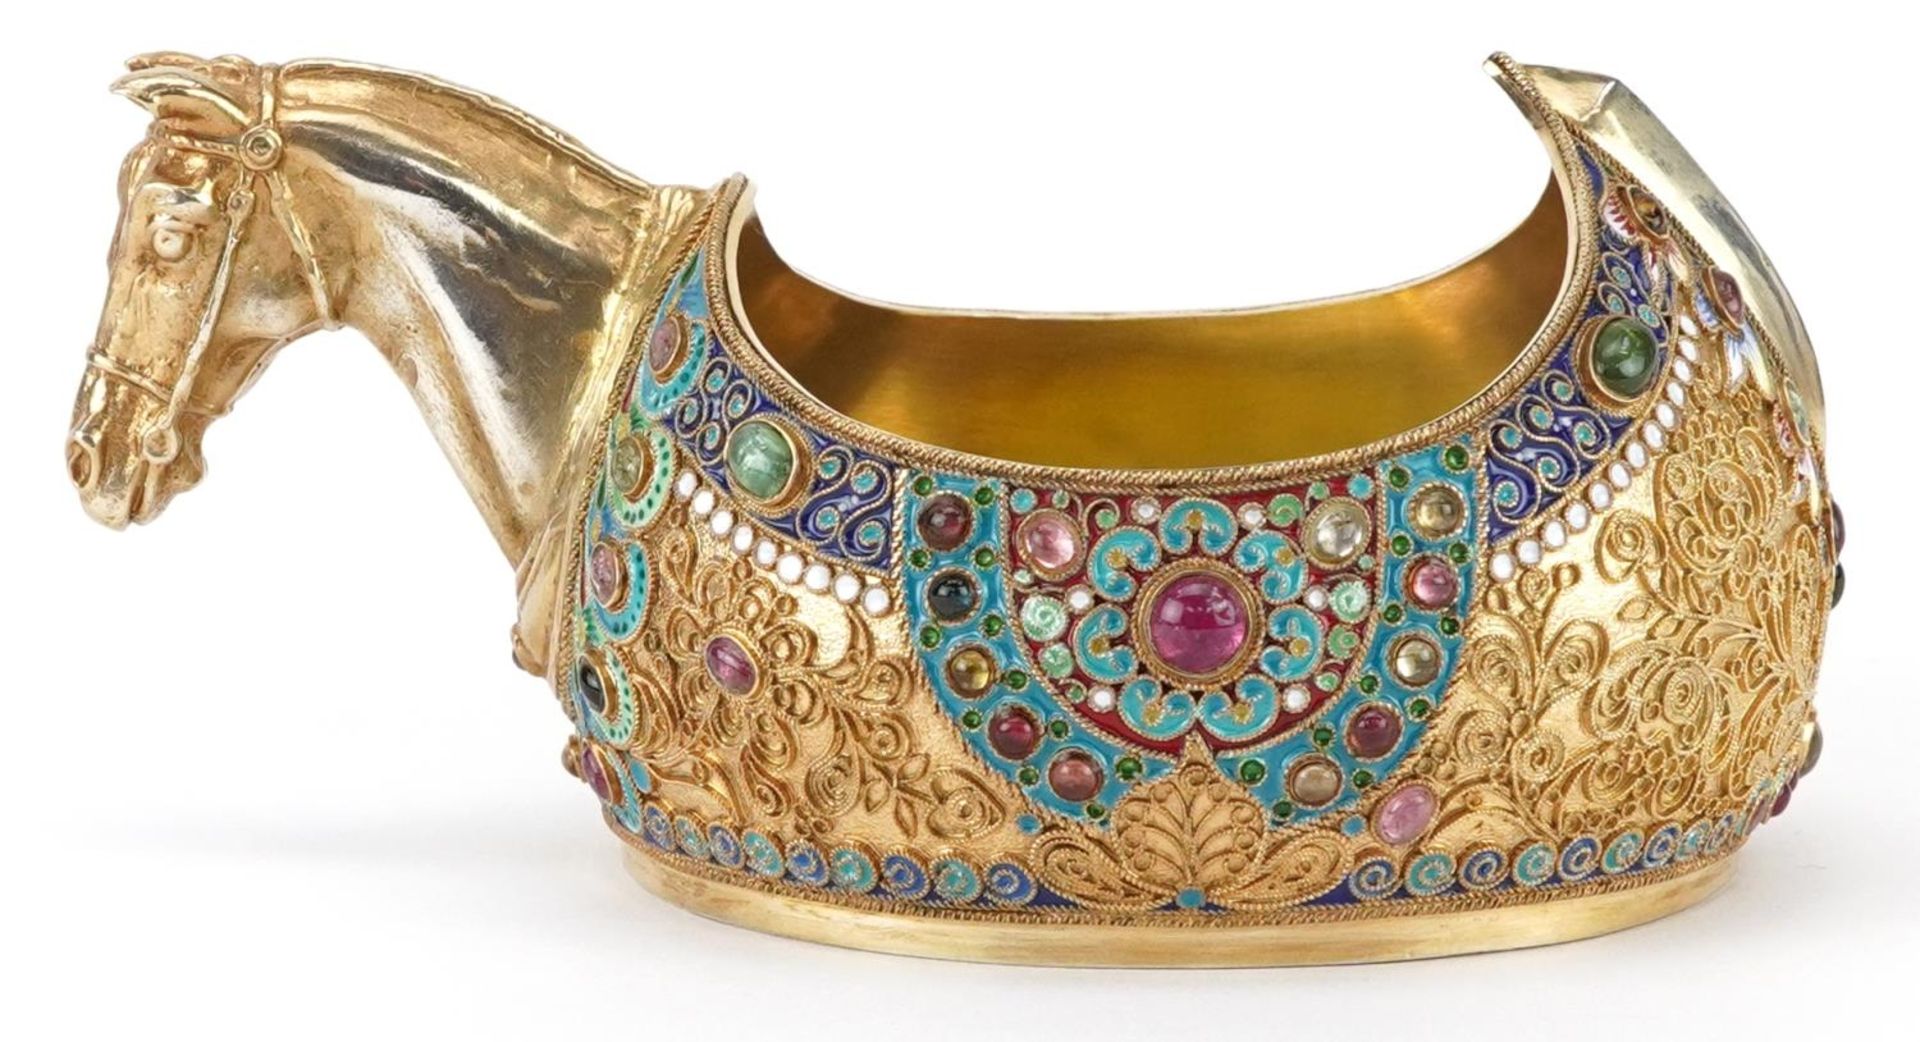 Silver gilt champleve enamel kovsh having a horsehead design handle and set with colourful - Image 2 of 5